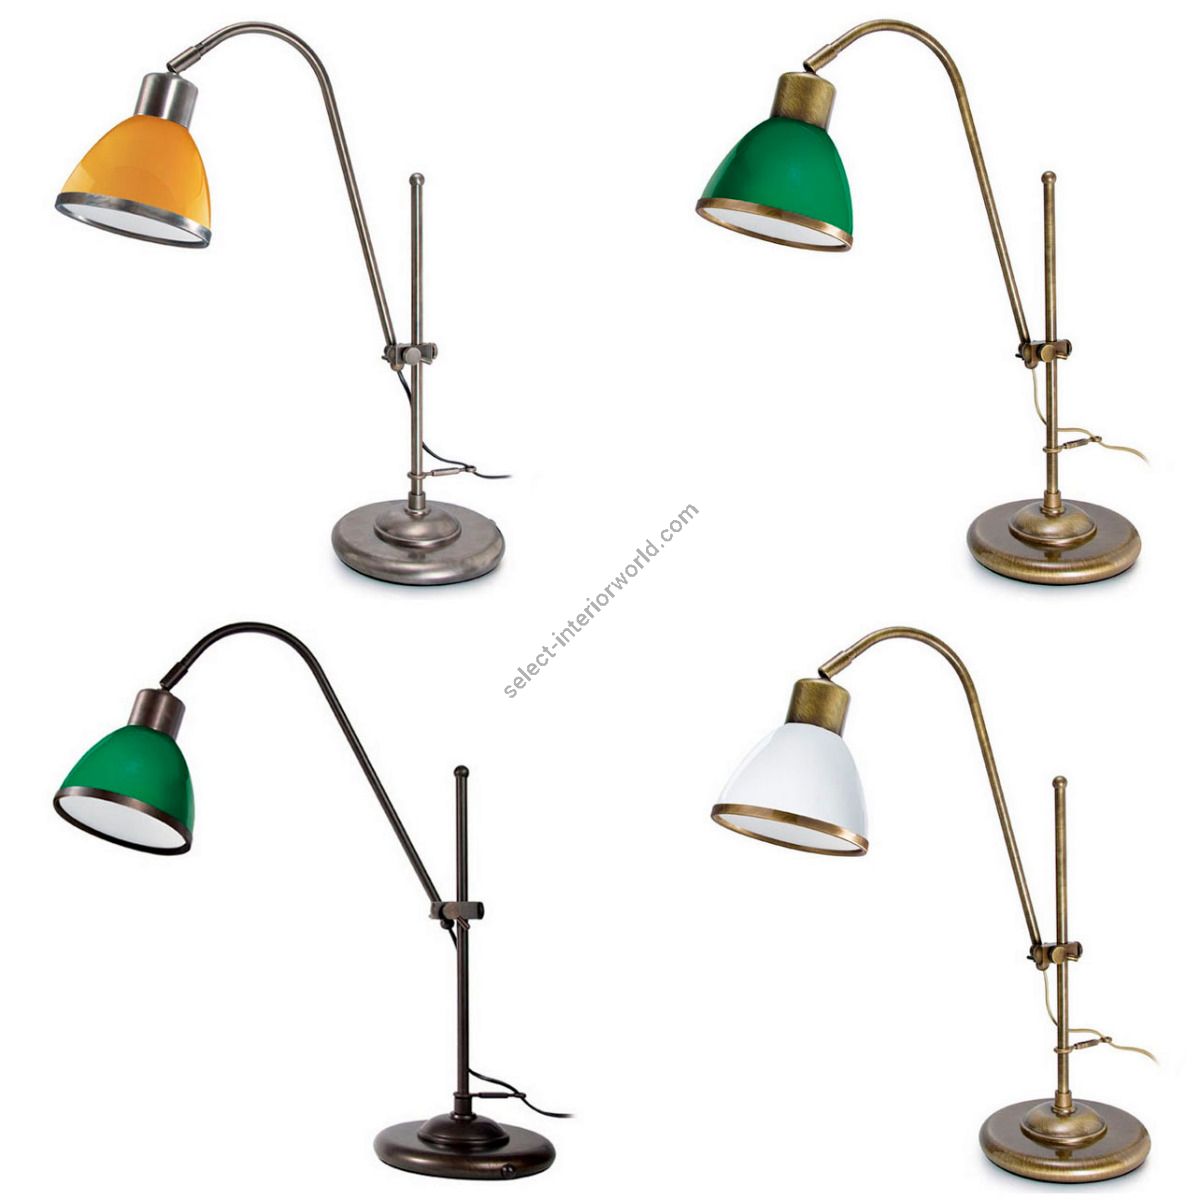 Moretti Luce / Vintage Table & Desk Lamp with Adjustable Arm